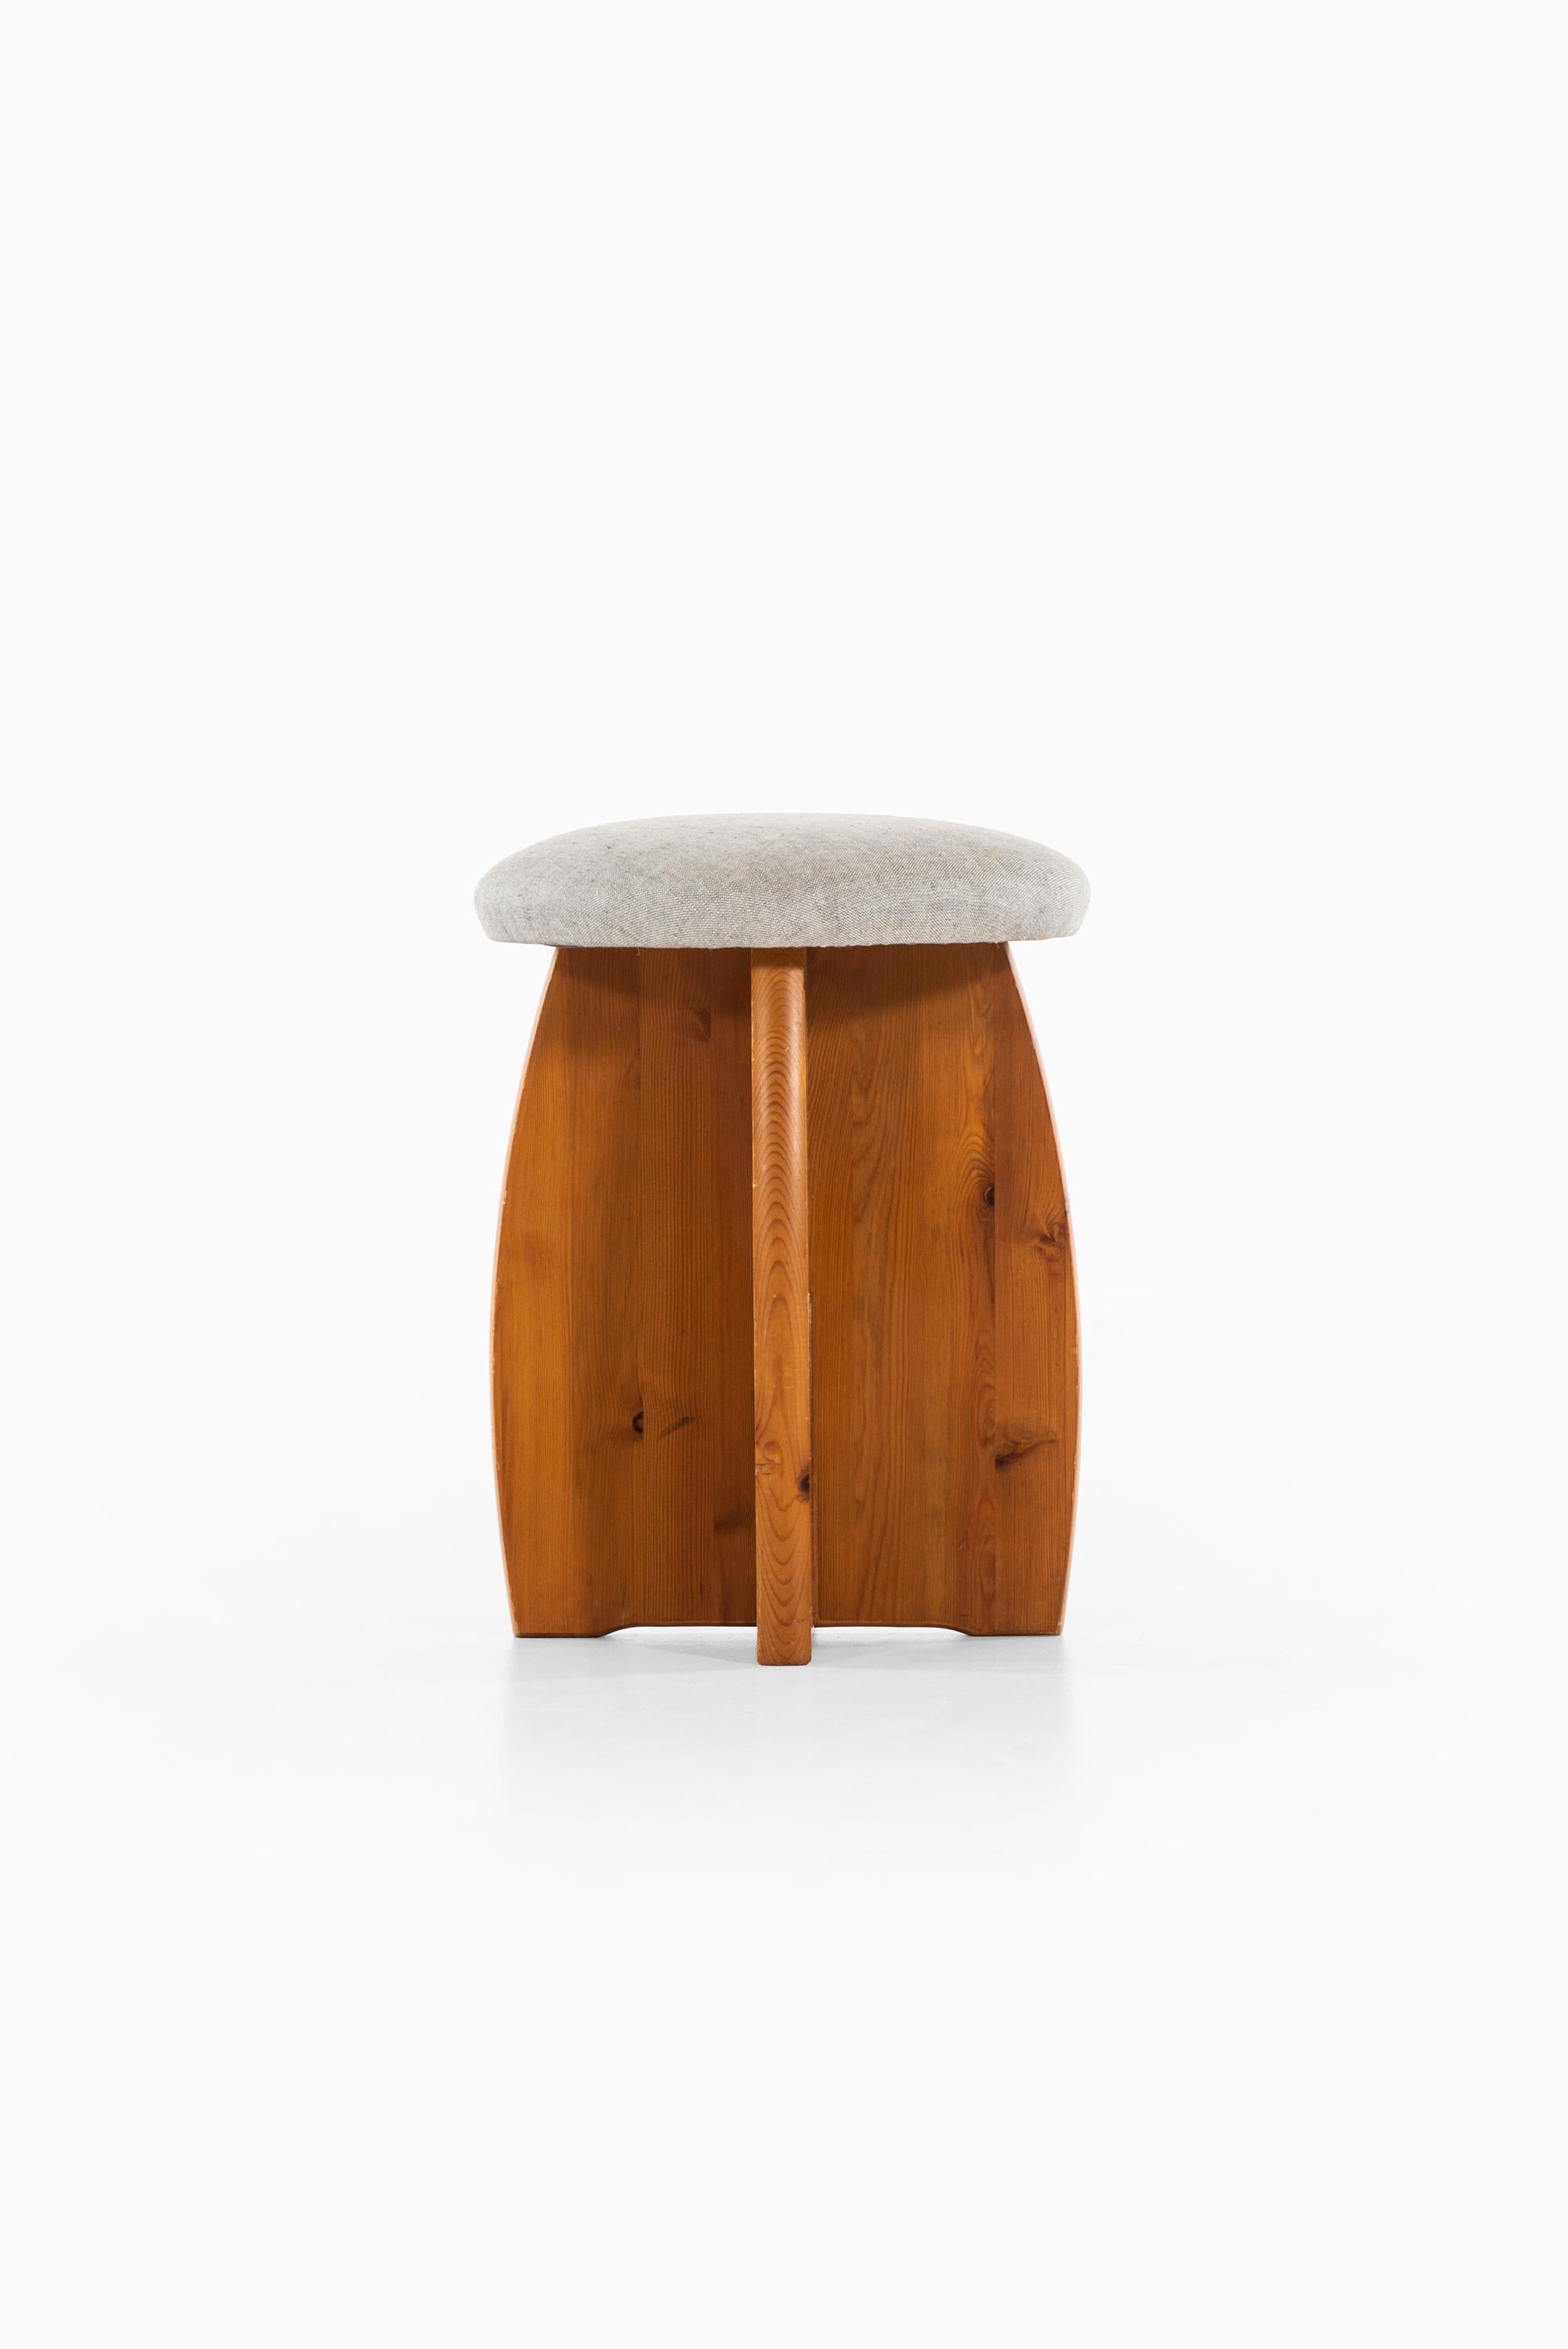 Set of 3 stools by unknown designer. Produced in Sweden.